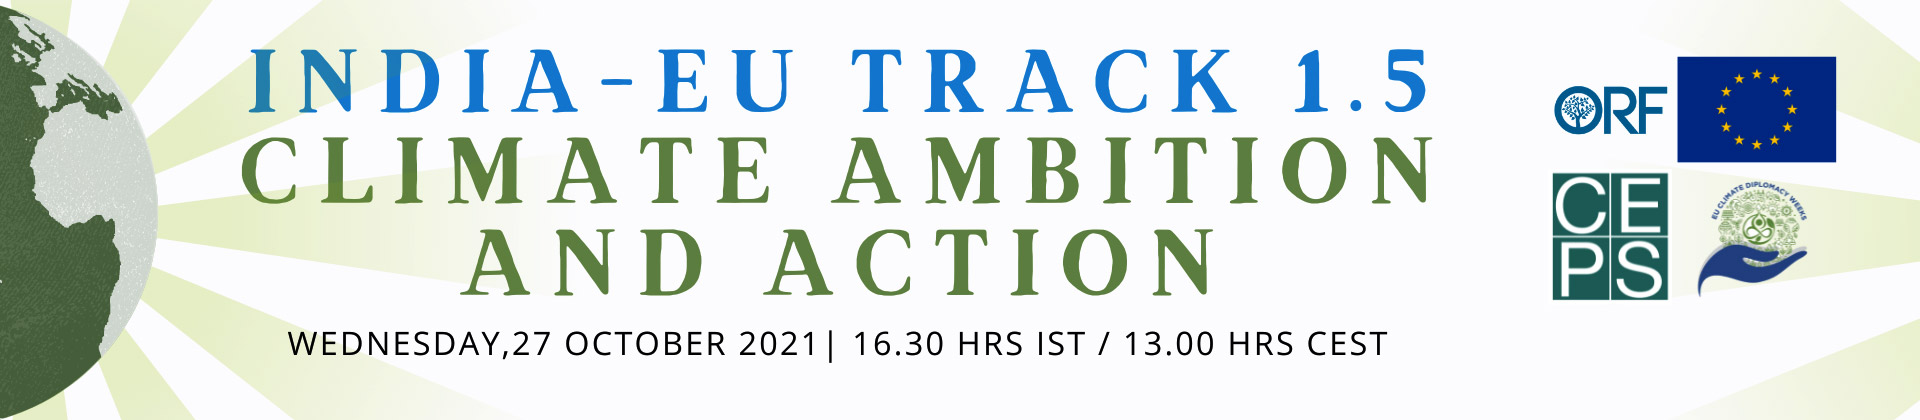 India-EU Track 1.5: Climate Ambition and Action